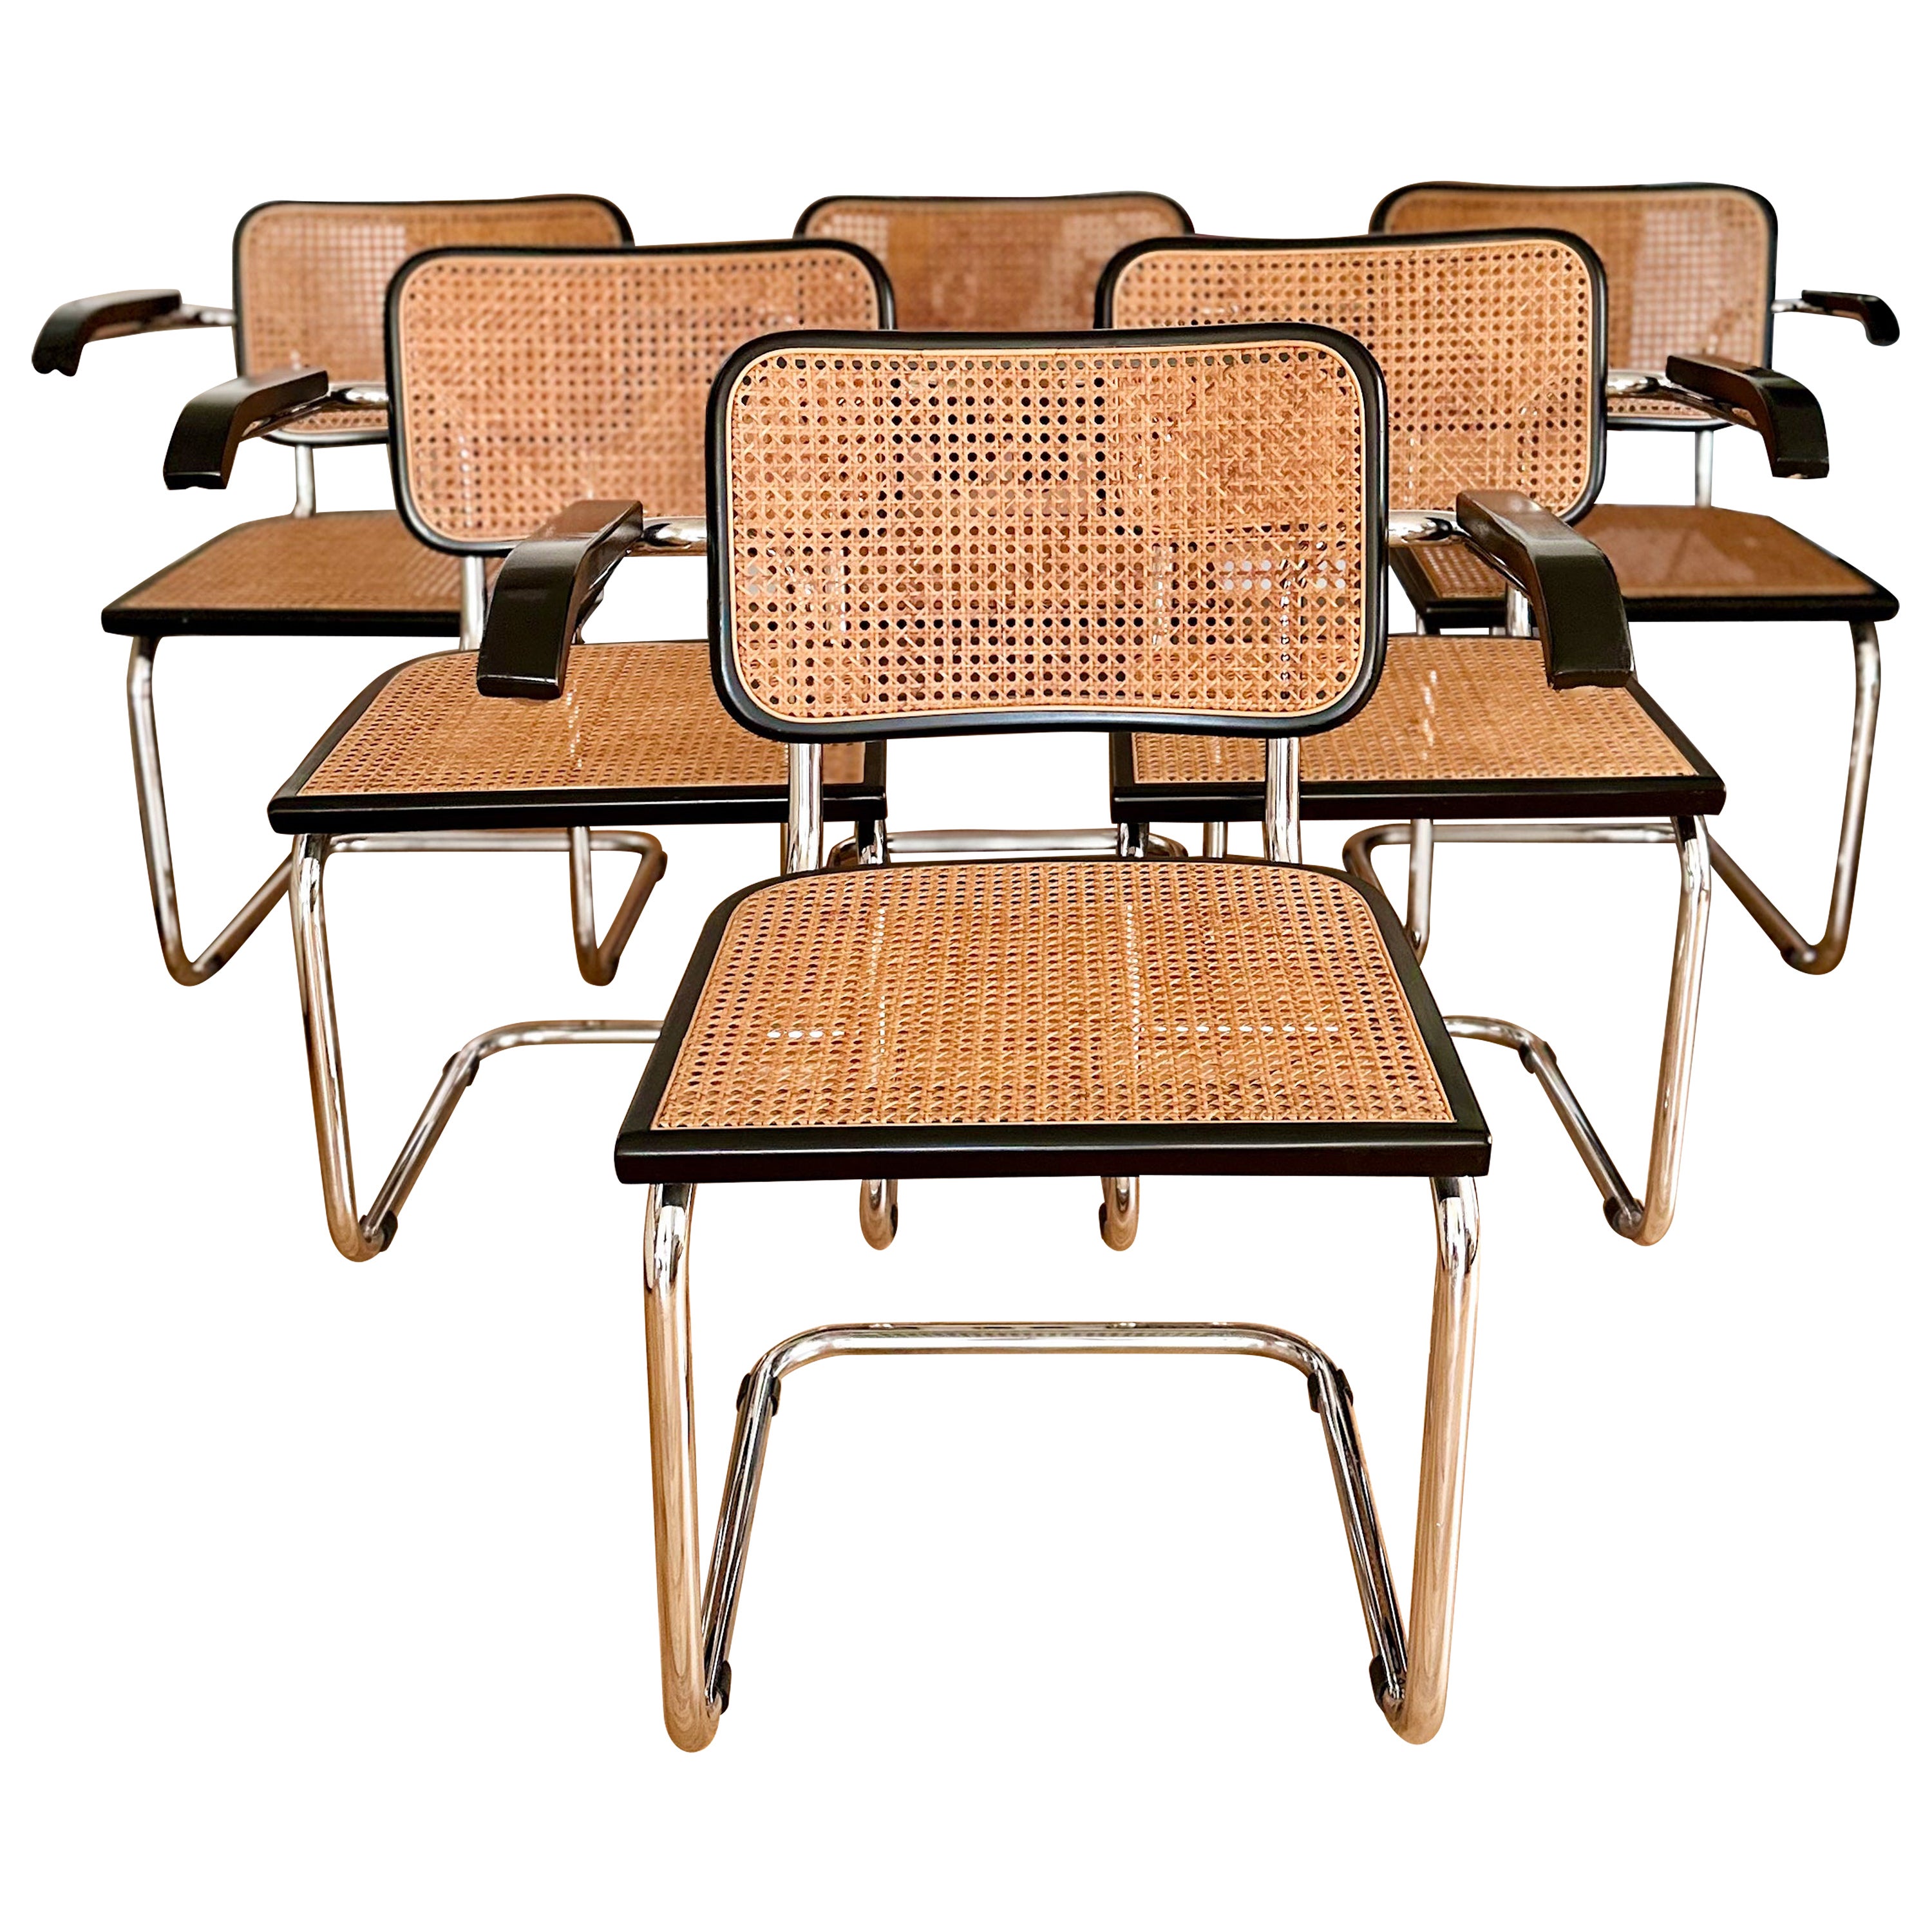 1980s Vintage Italian Cesca Armchairs Attributed to Marcel Breuer - Set of 6